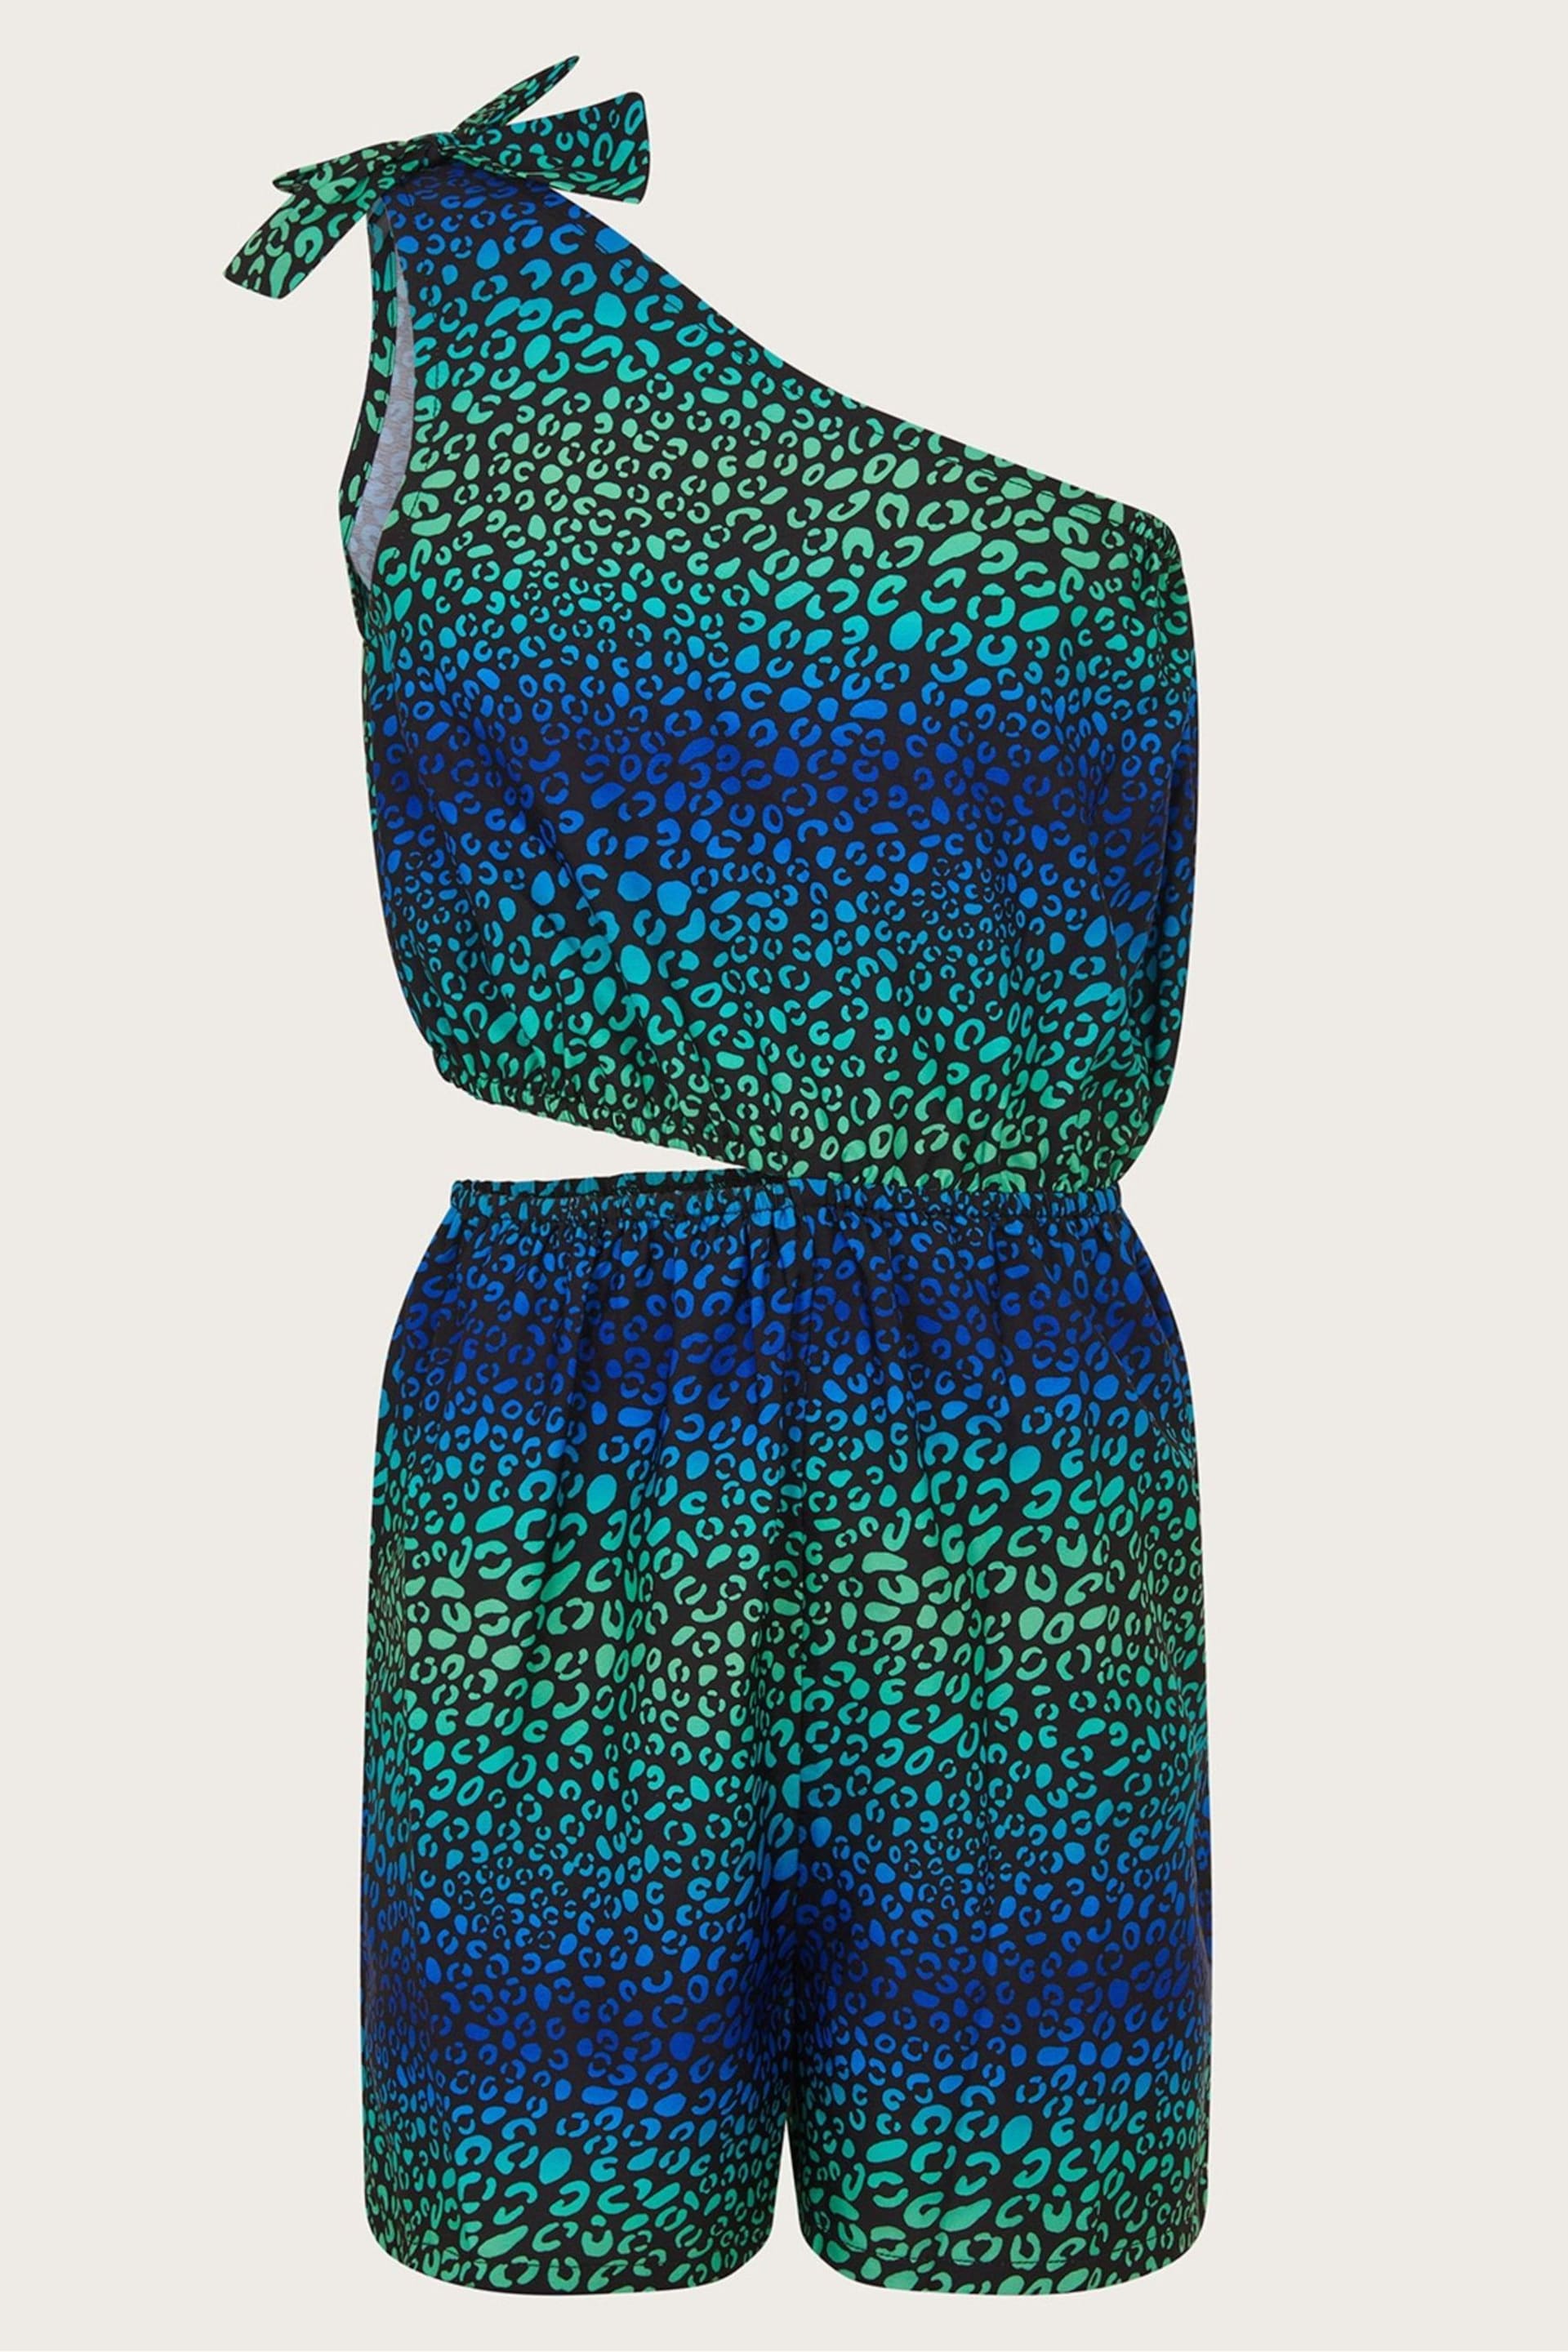 Monsoon Green Leopard Print Playsuit - Image 1 of 3